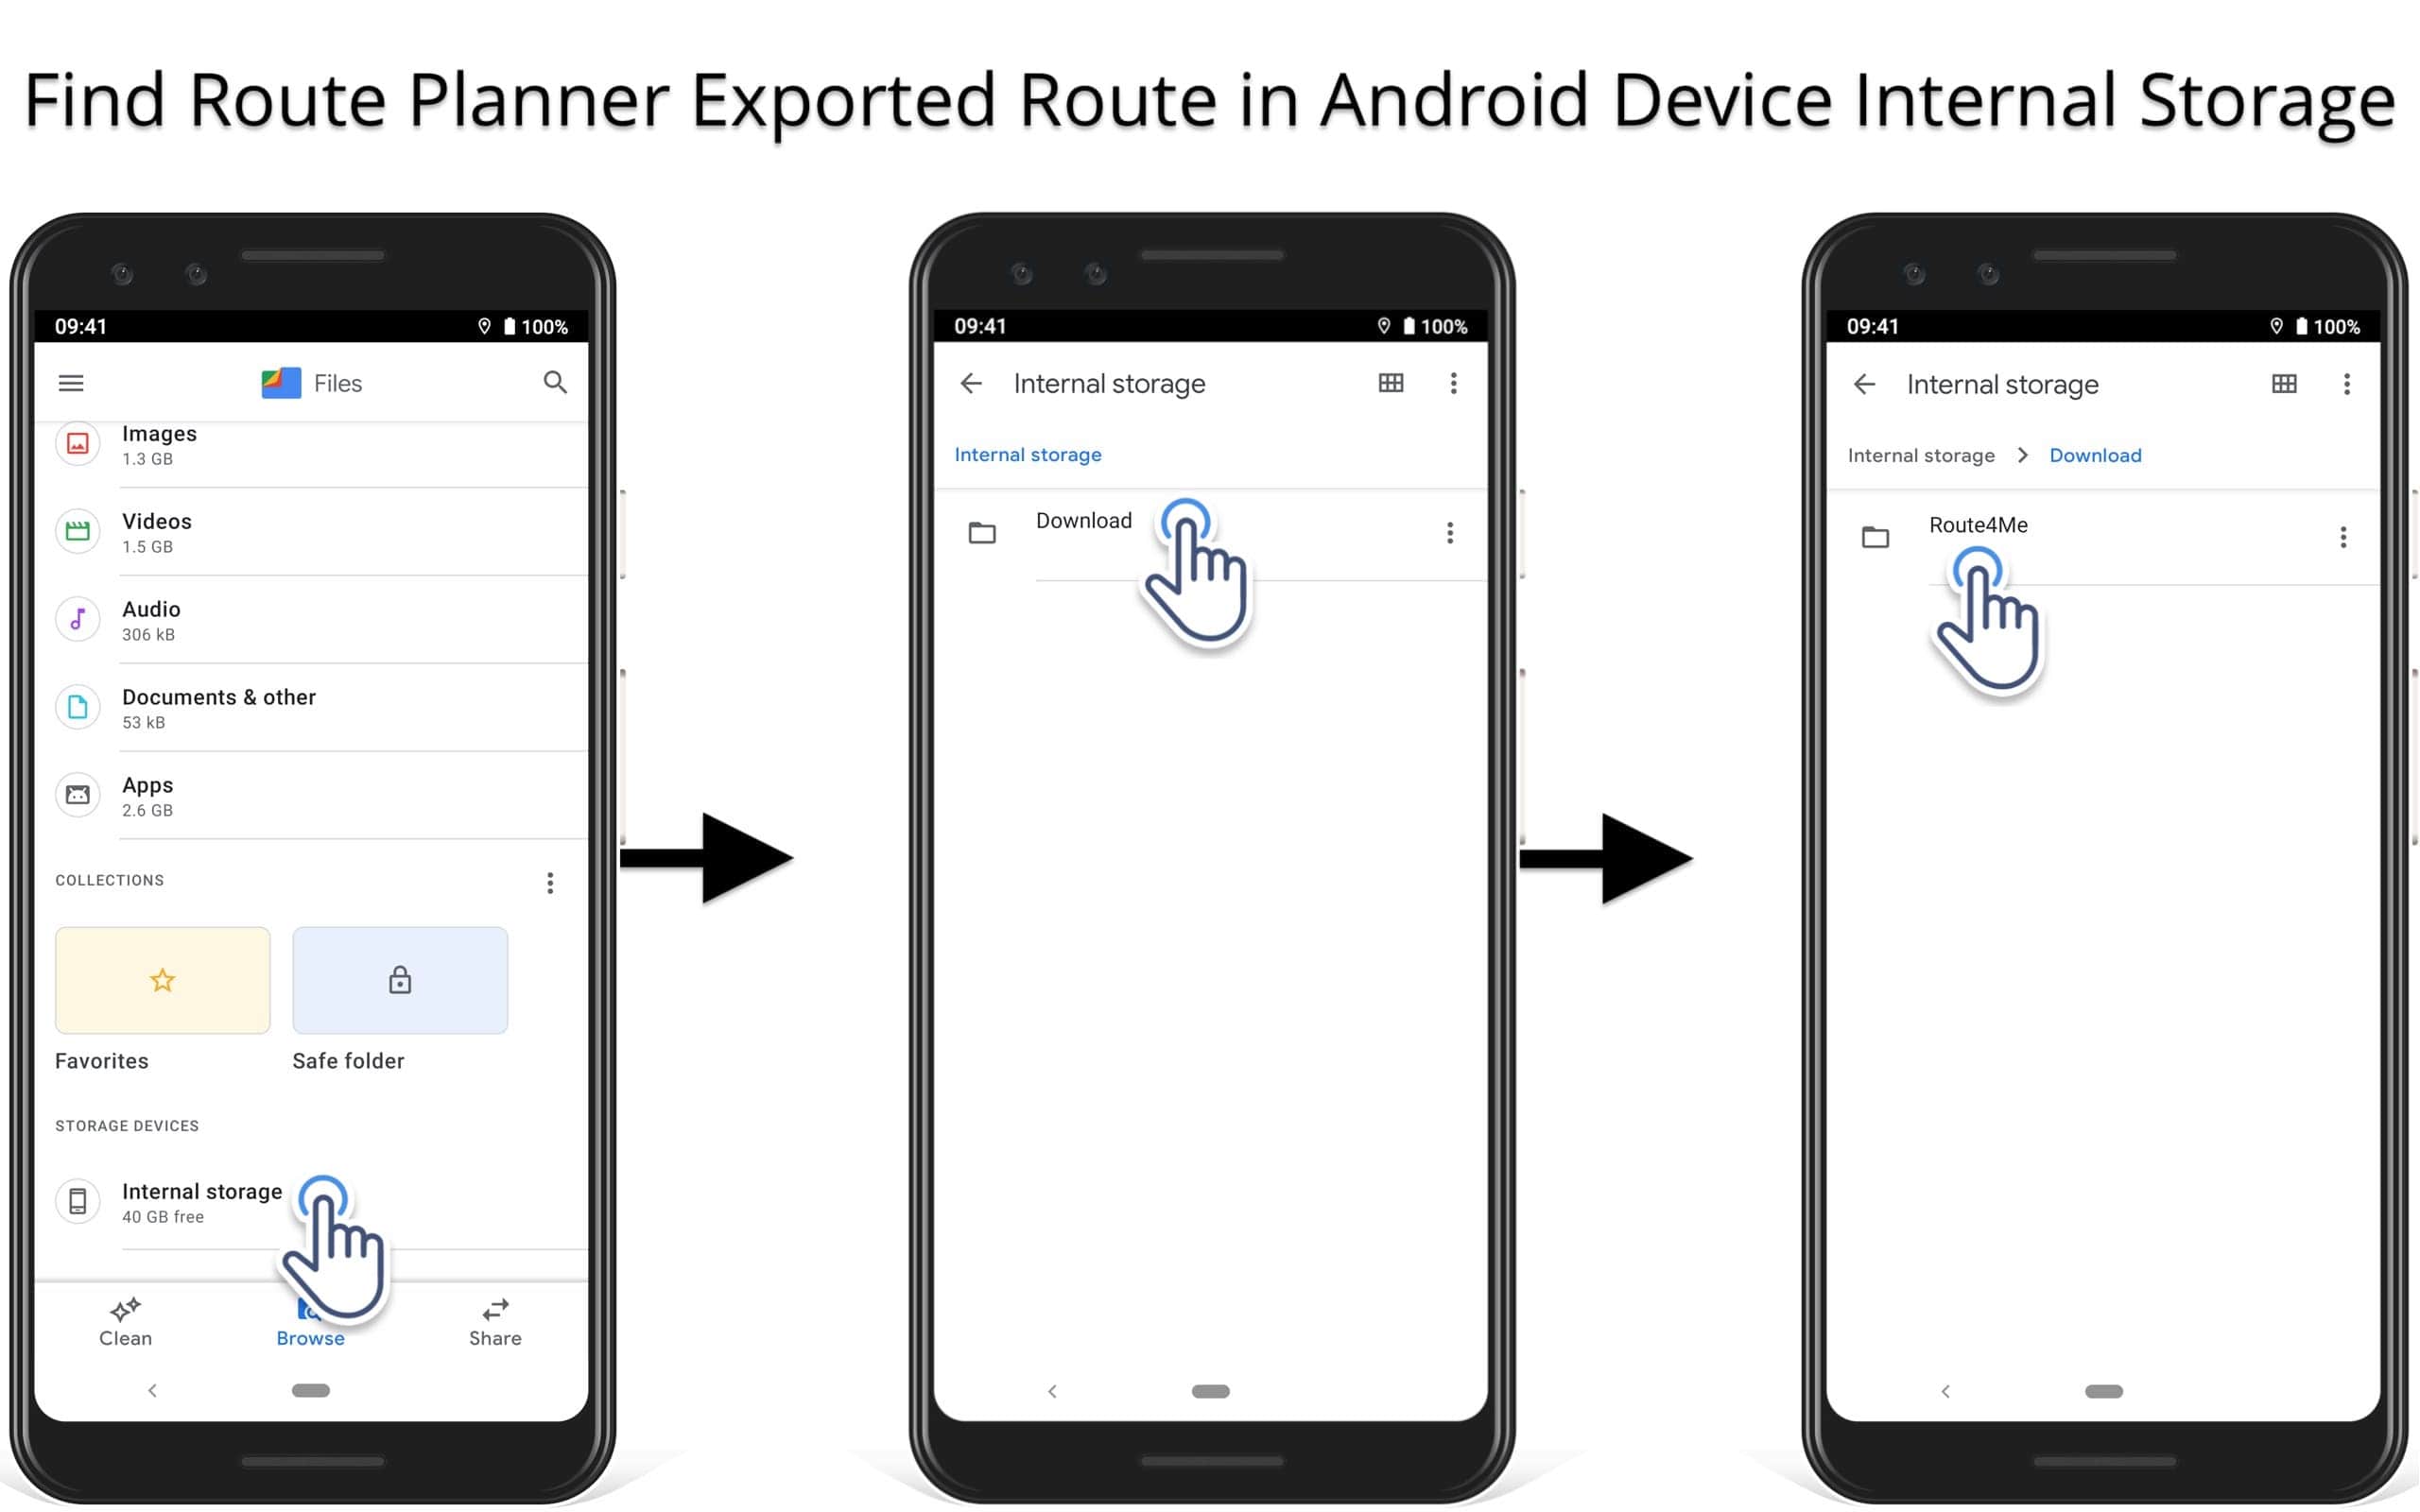 Find and open downloaded CSV route files in the internal storage on your Android device.